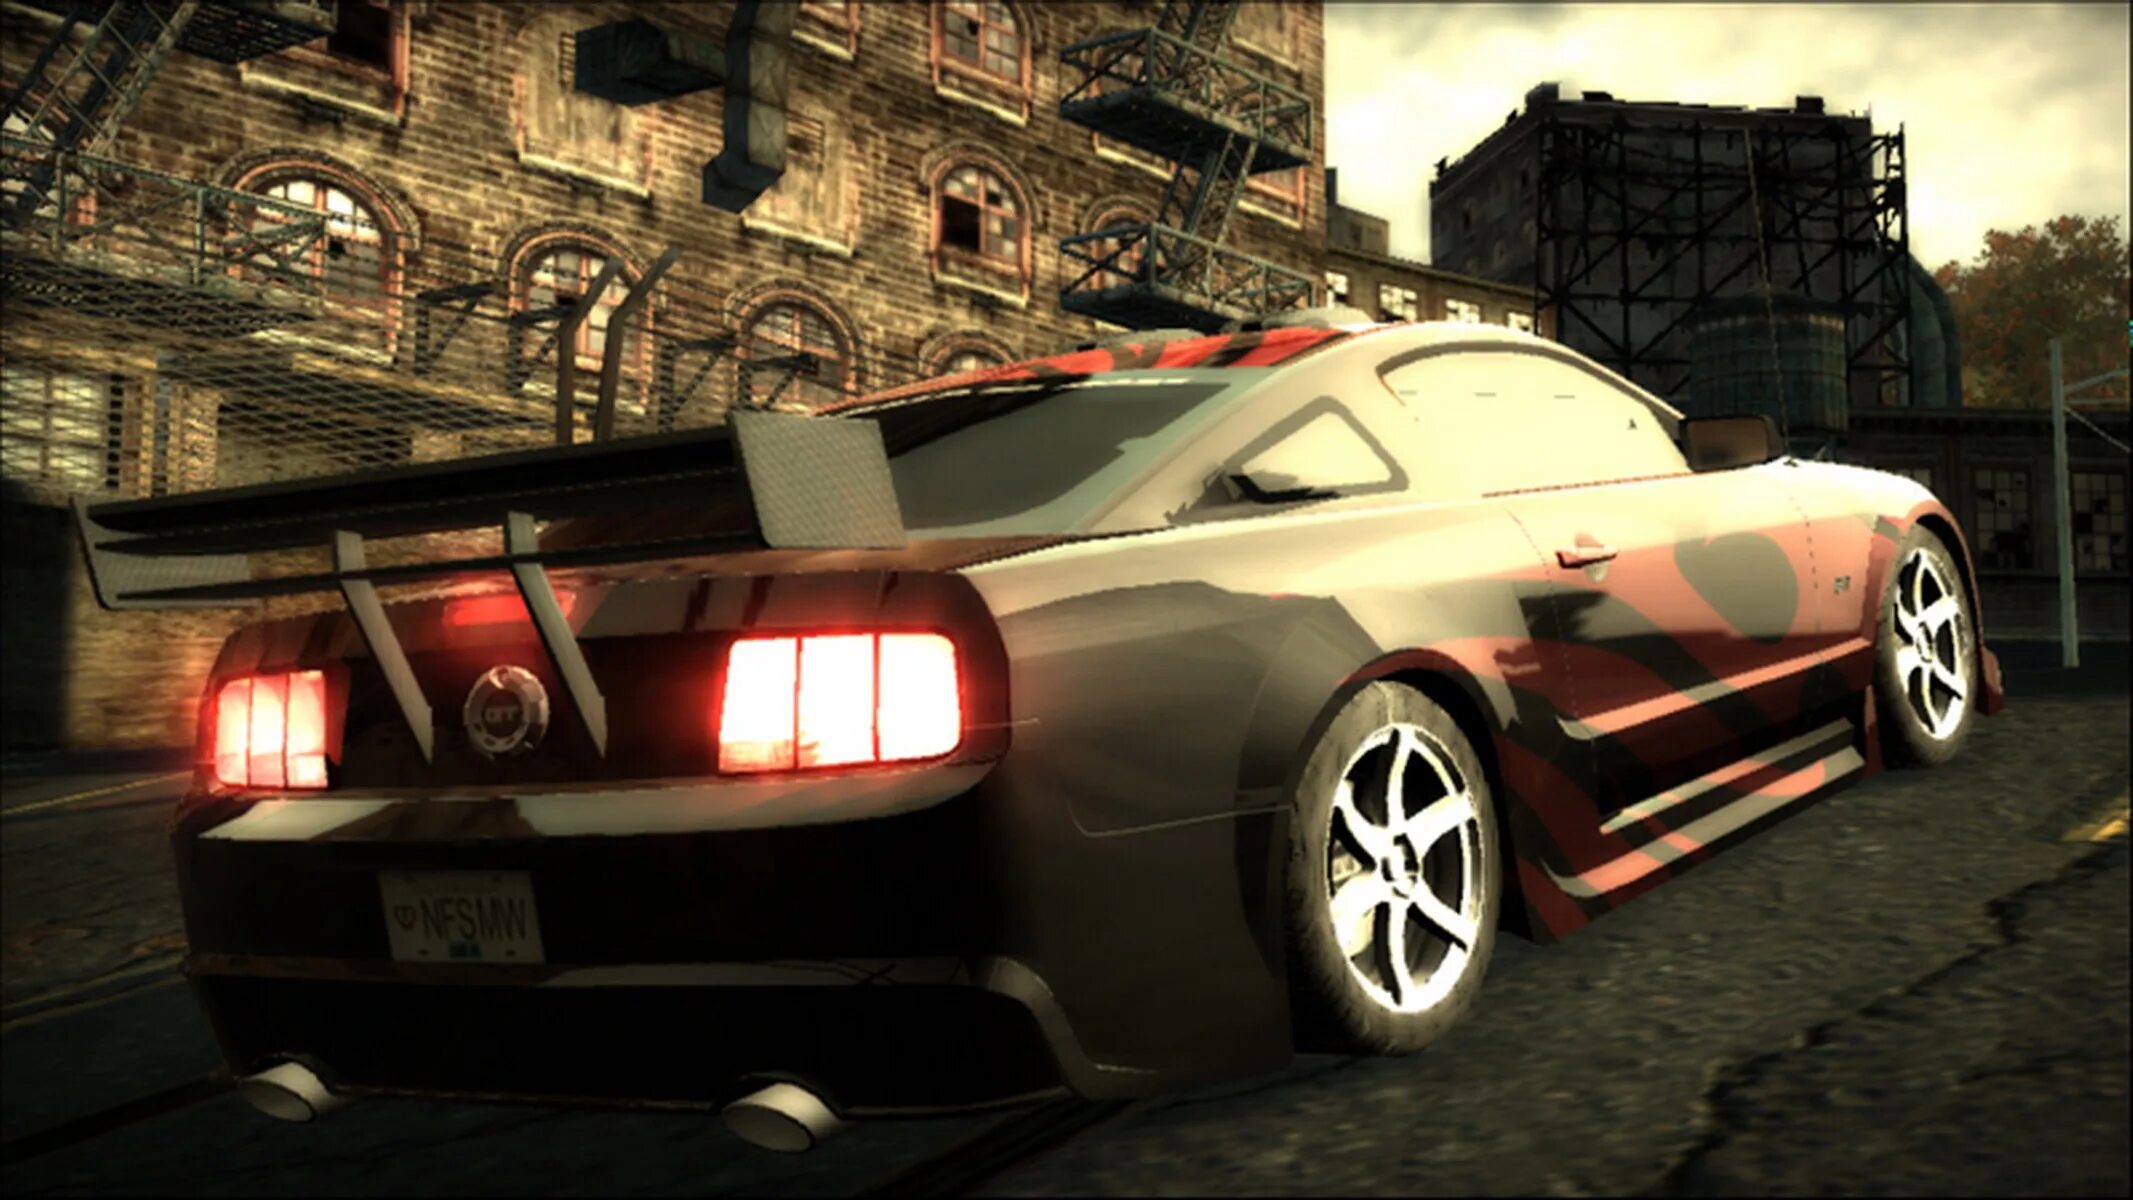 Машина рога NFS most wanted. Мустанг 2005 NFS. NFS most wanted 2005 машины. Мустанг most wanted 2005. Nfs mw cars